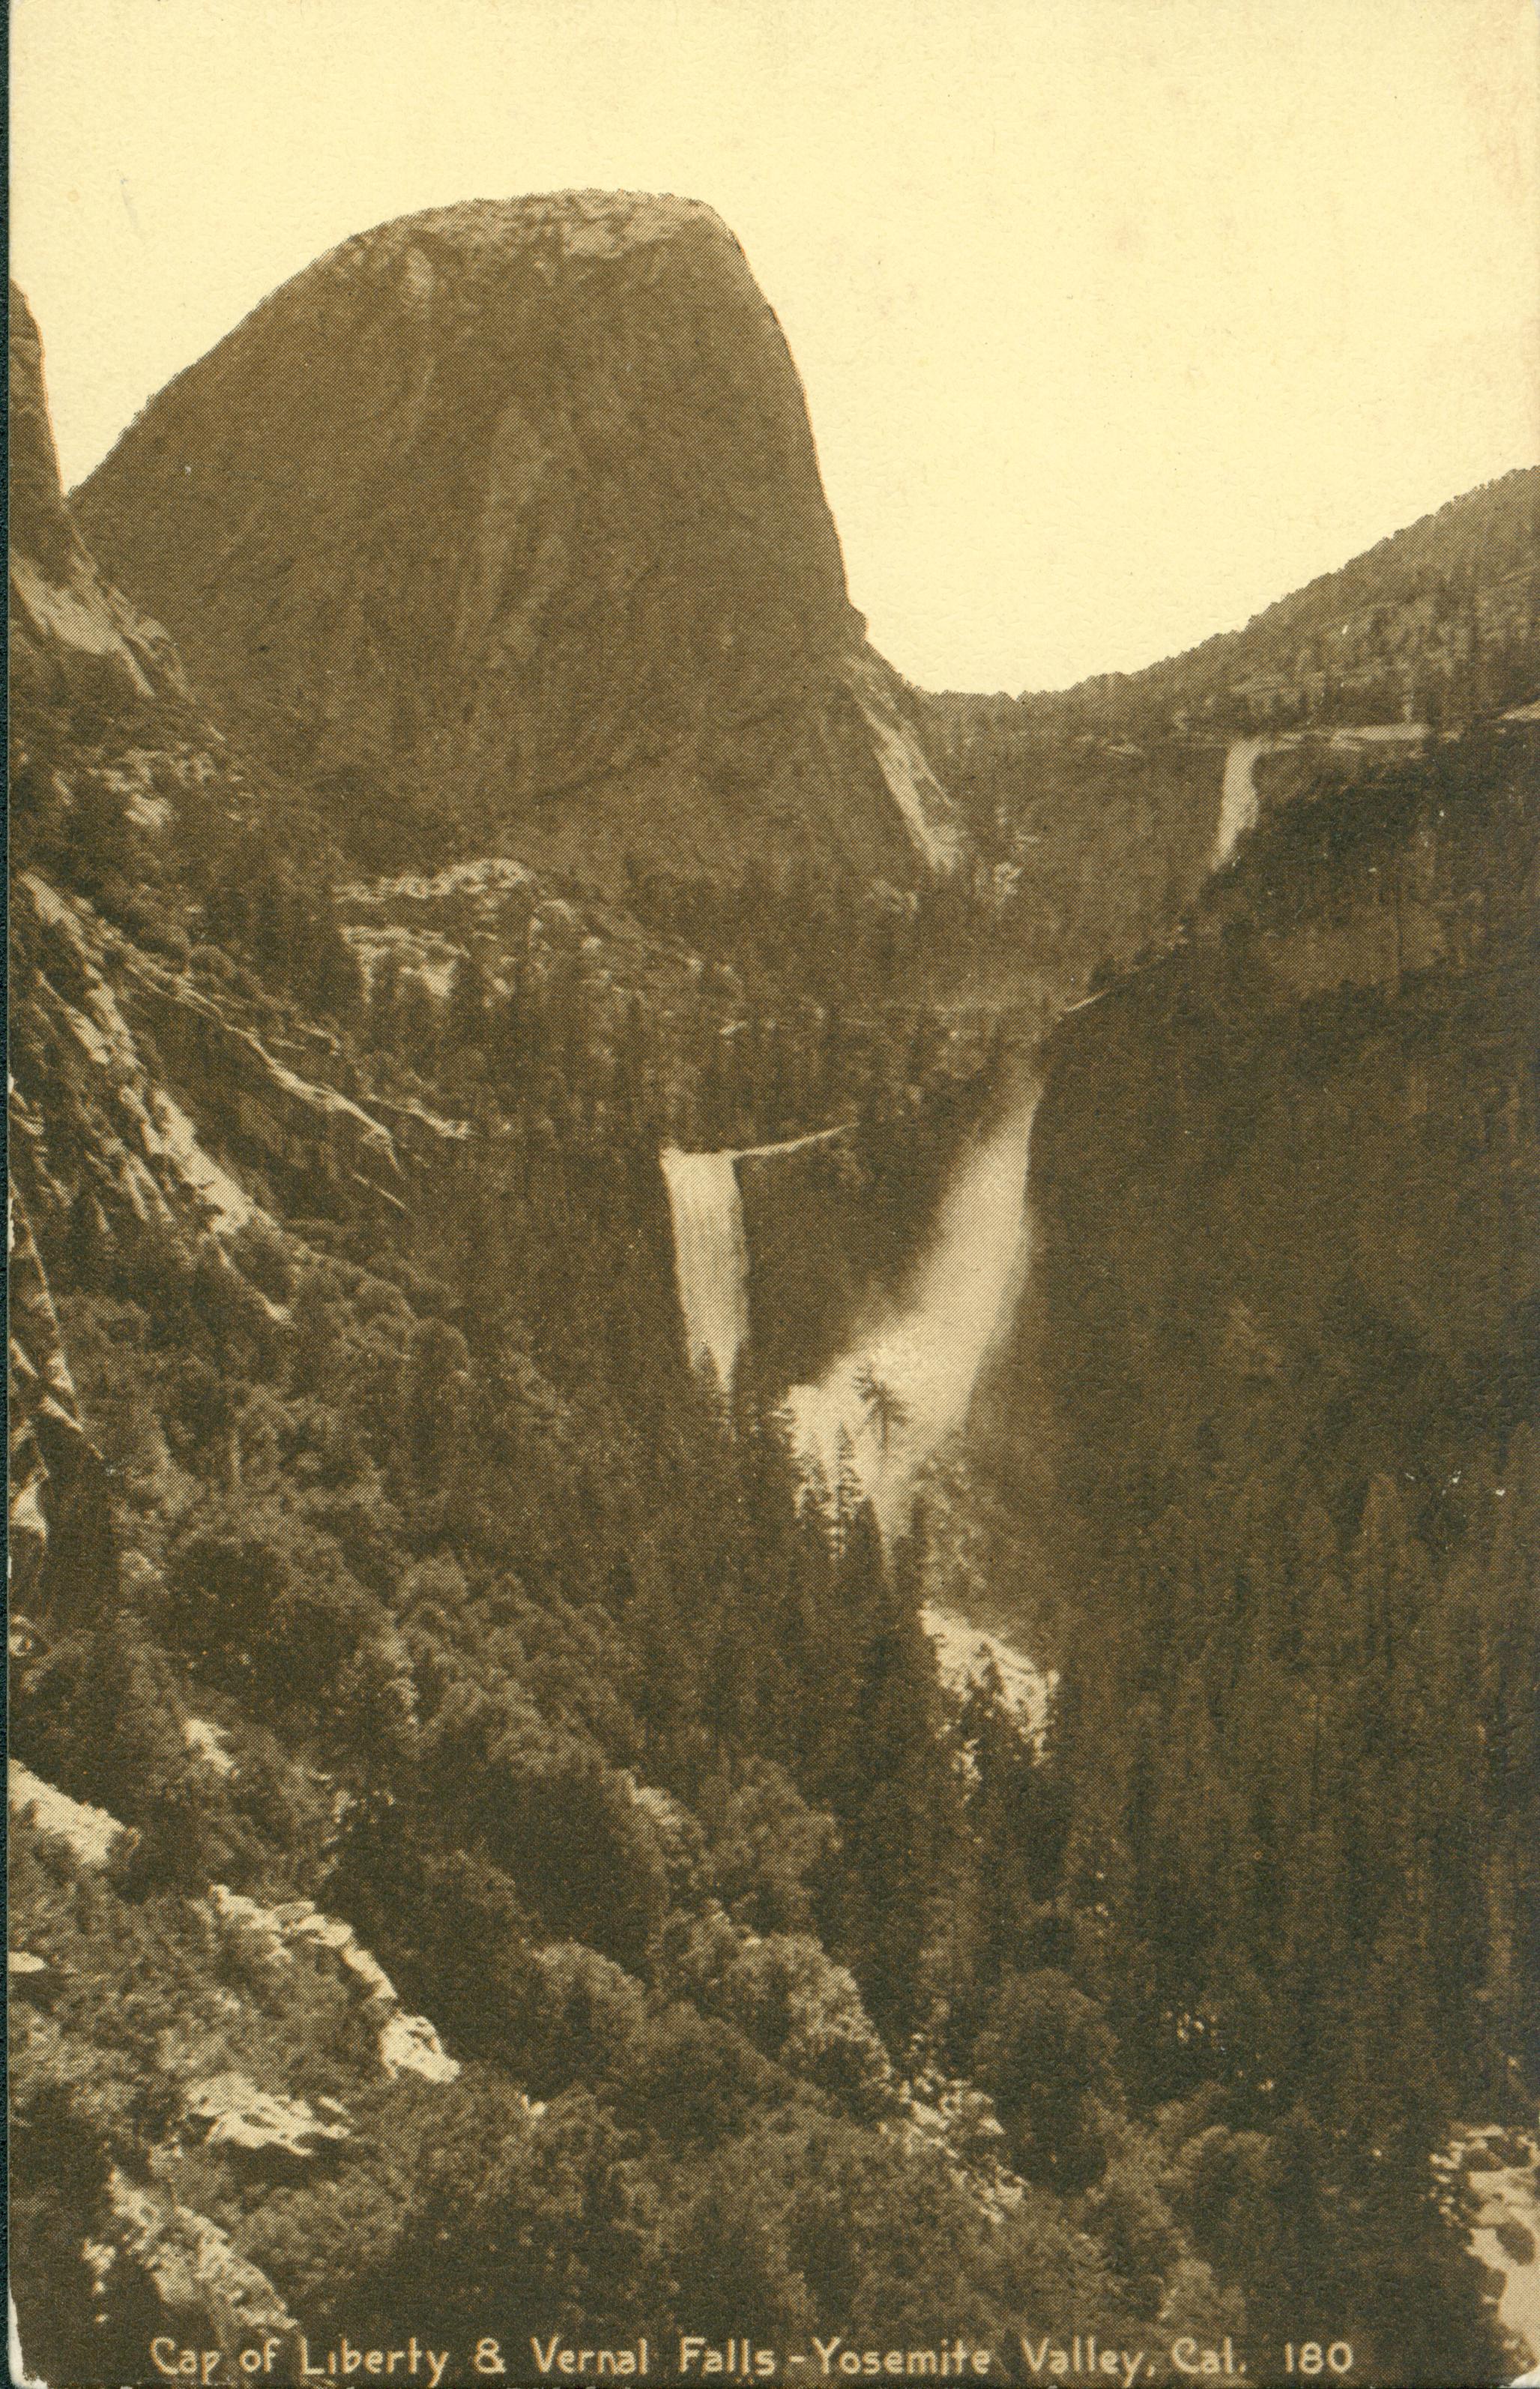 Shows a view of Vernal Falls with the Cap of Liberty on the left